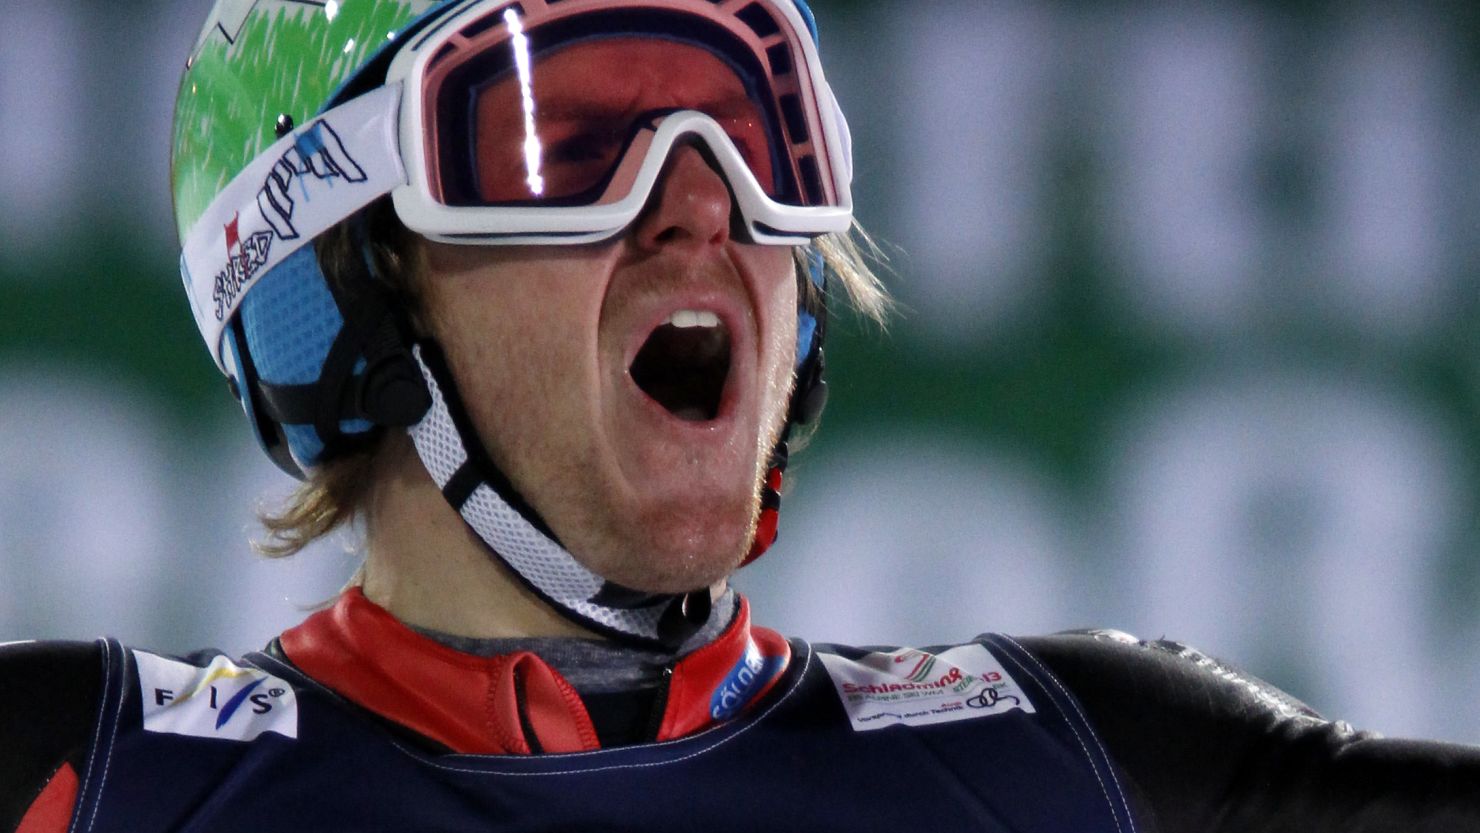 Ted Ligety celebrates his second gold medal of the world skiing championships after victory in the super combined.